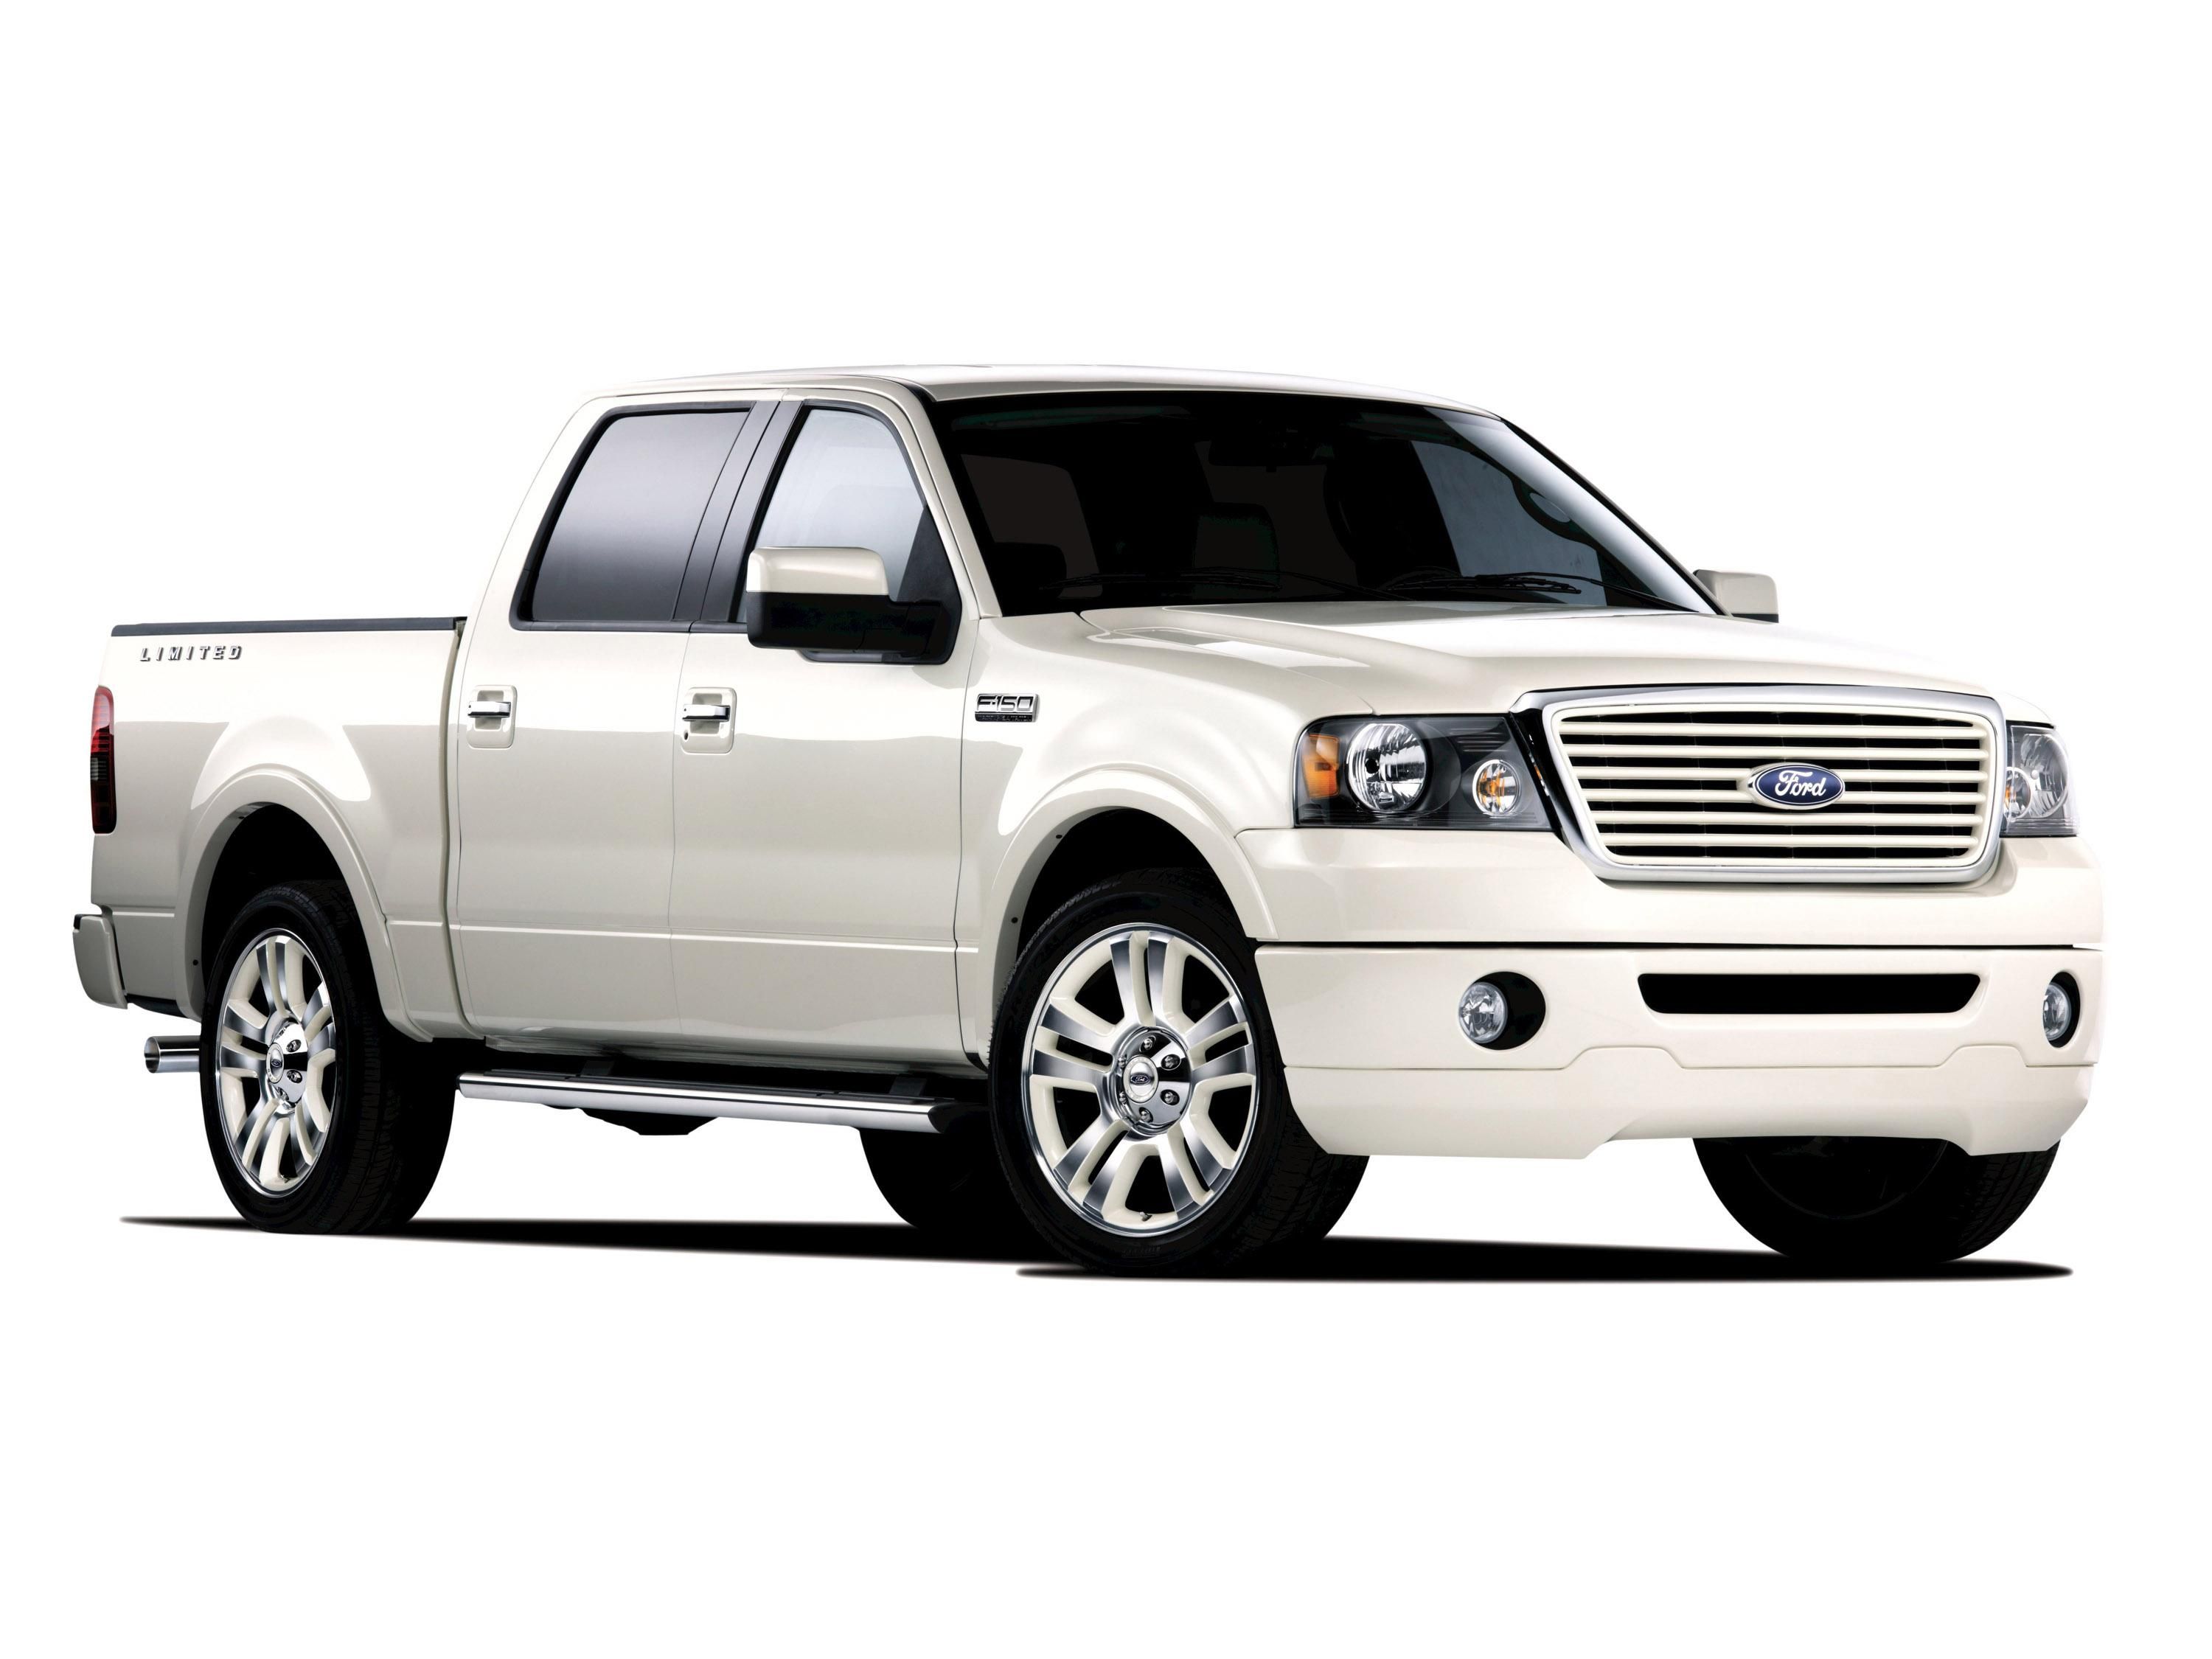 2008 Ford F-150 Lariat Limited